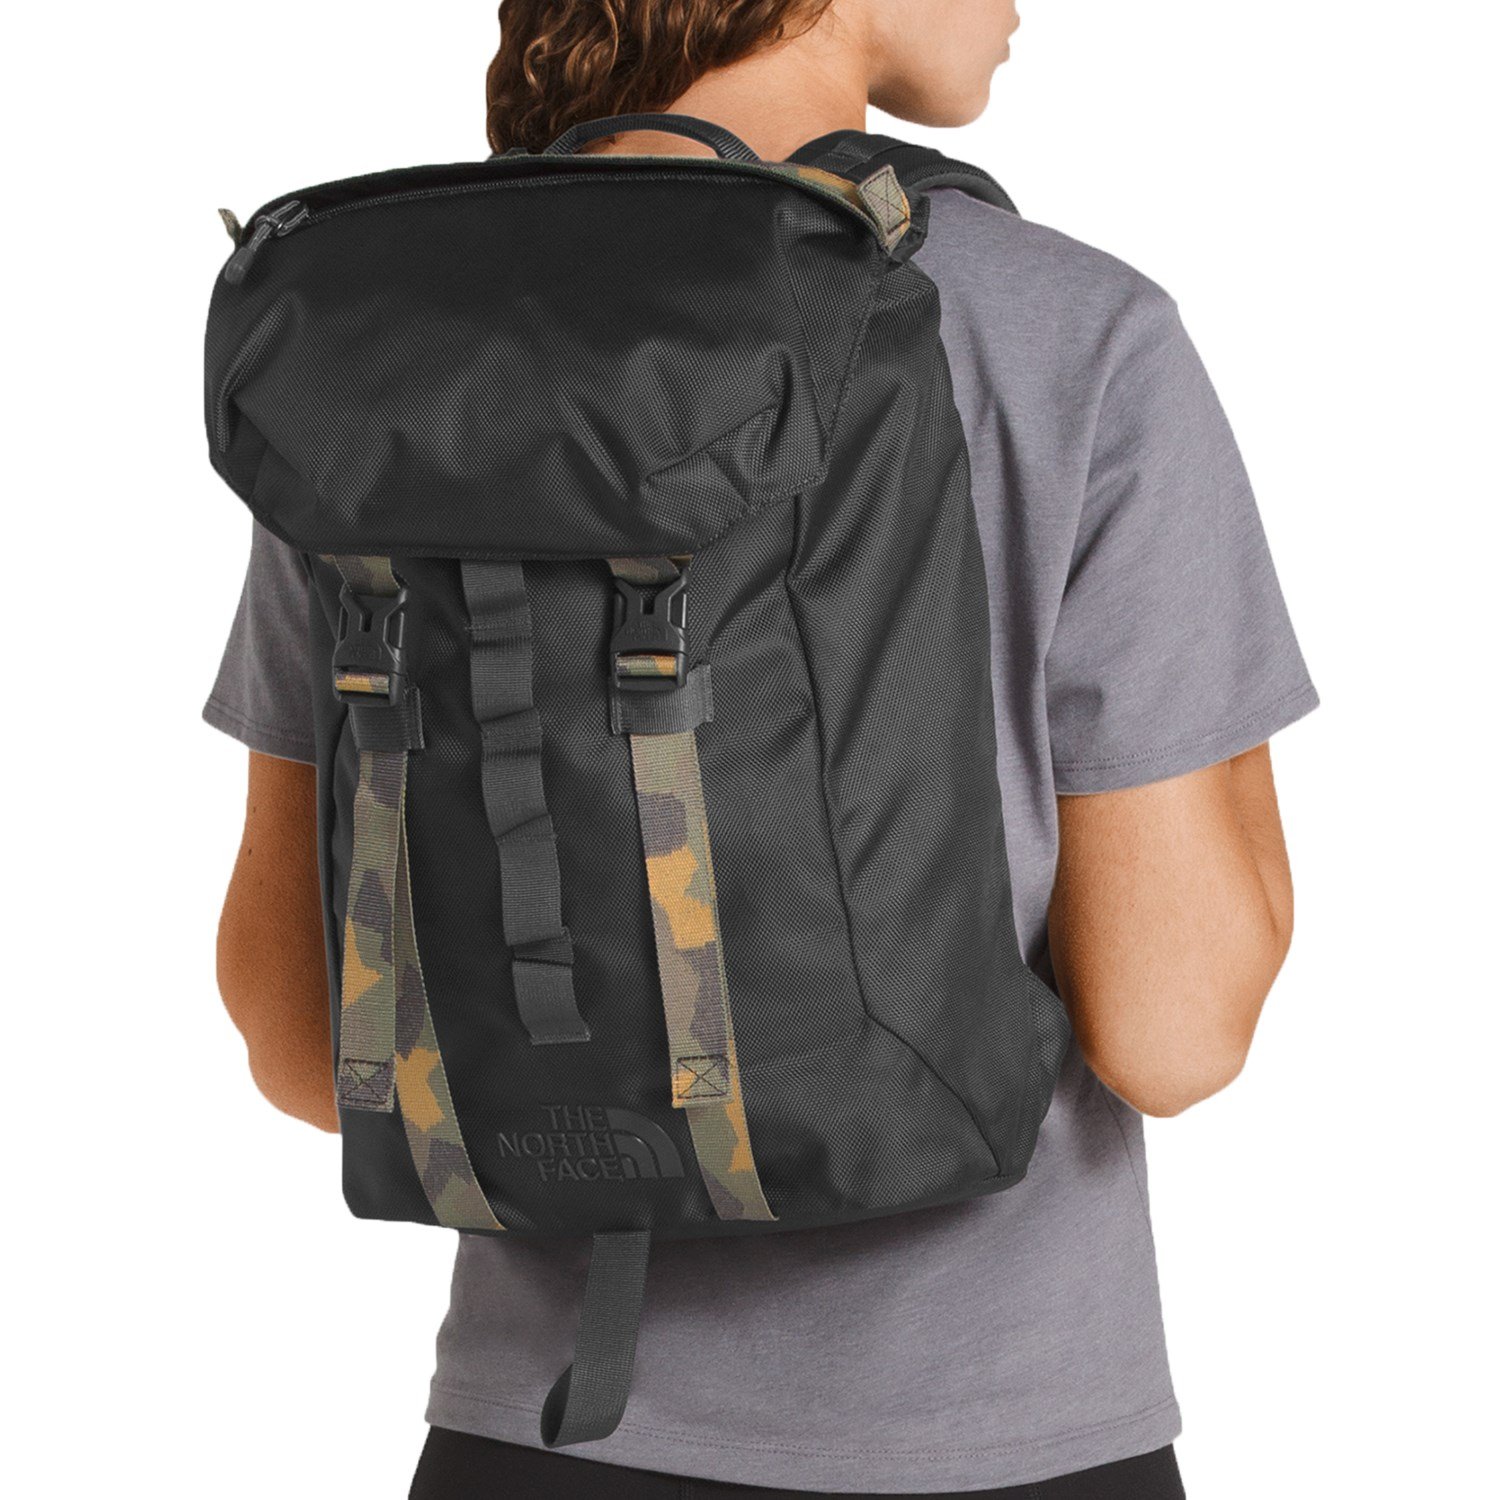 lineage ruck 37l review